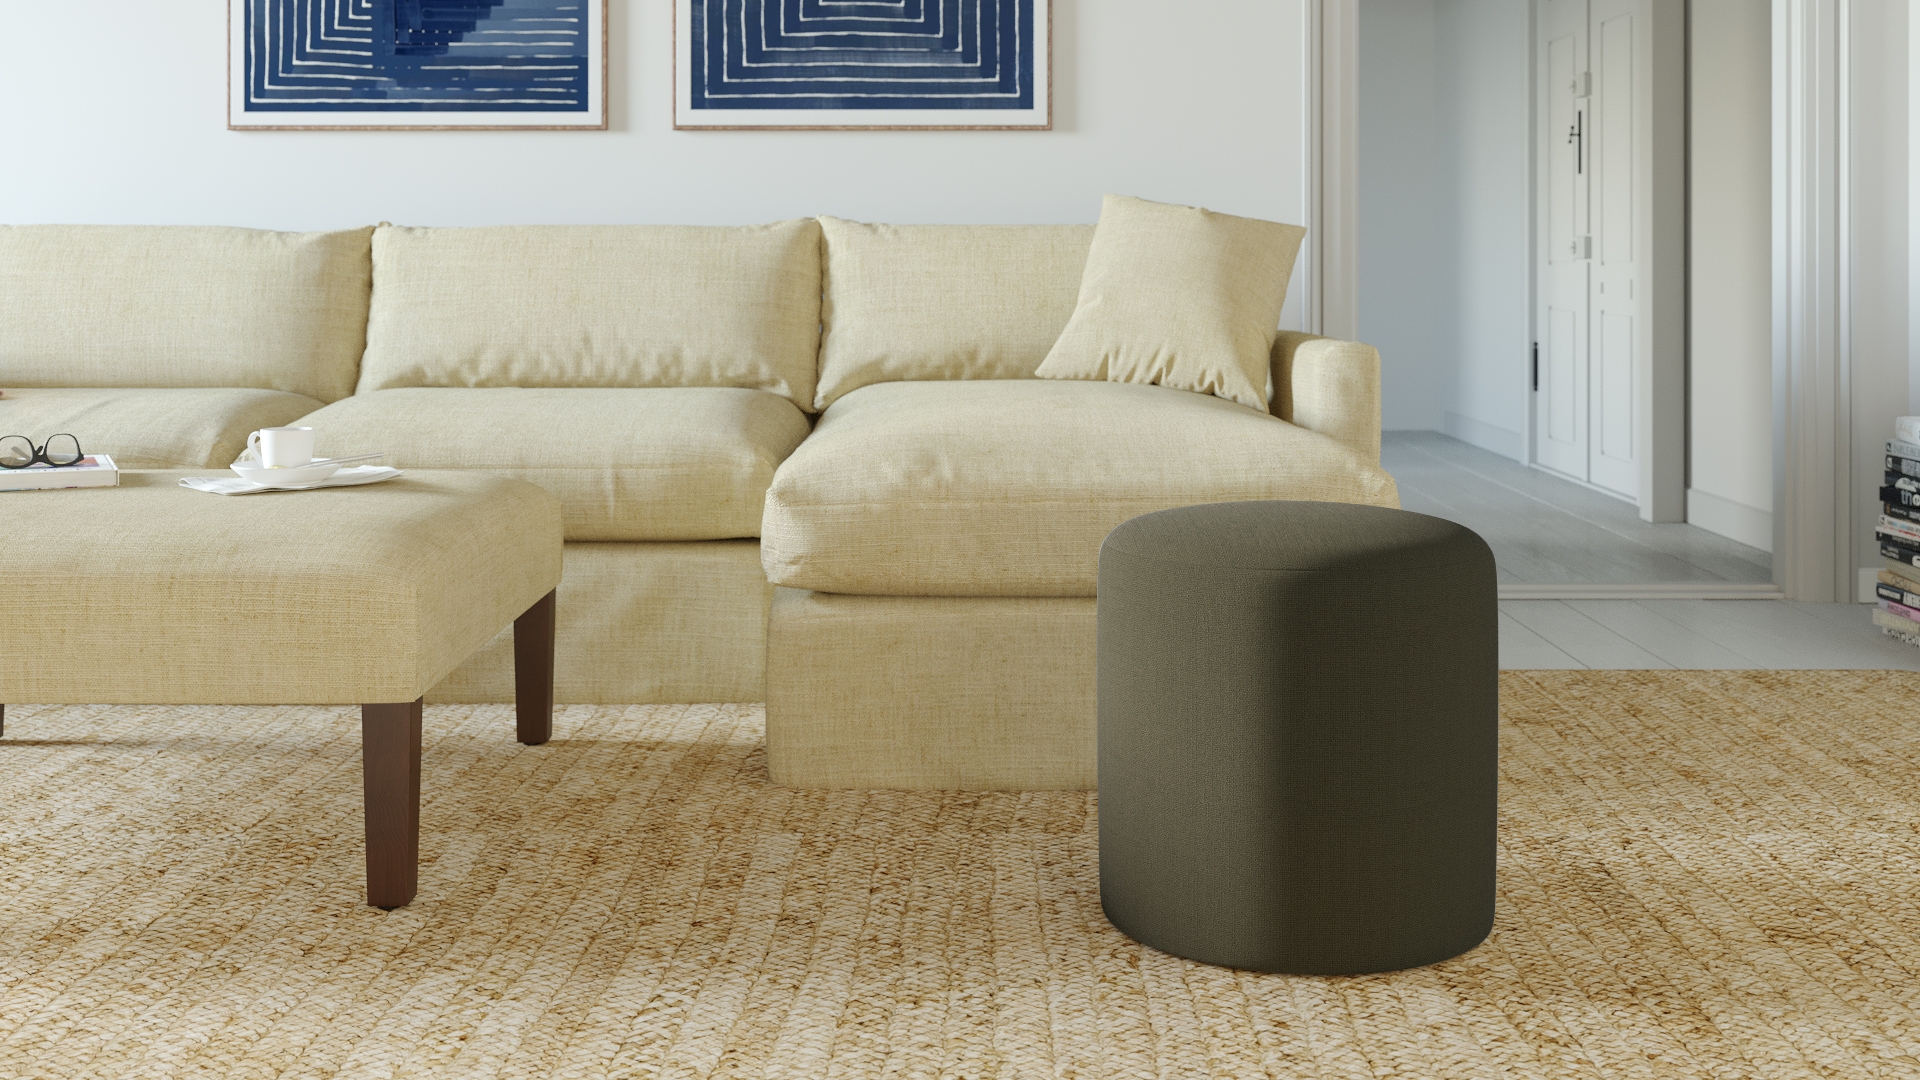 Chapter Ottoman - Olive Linen - Image 2